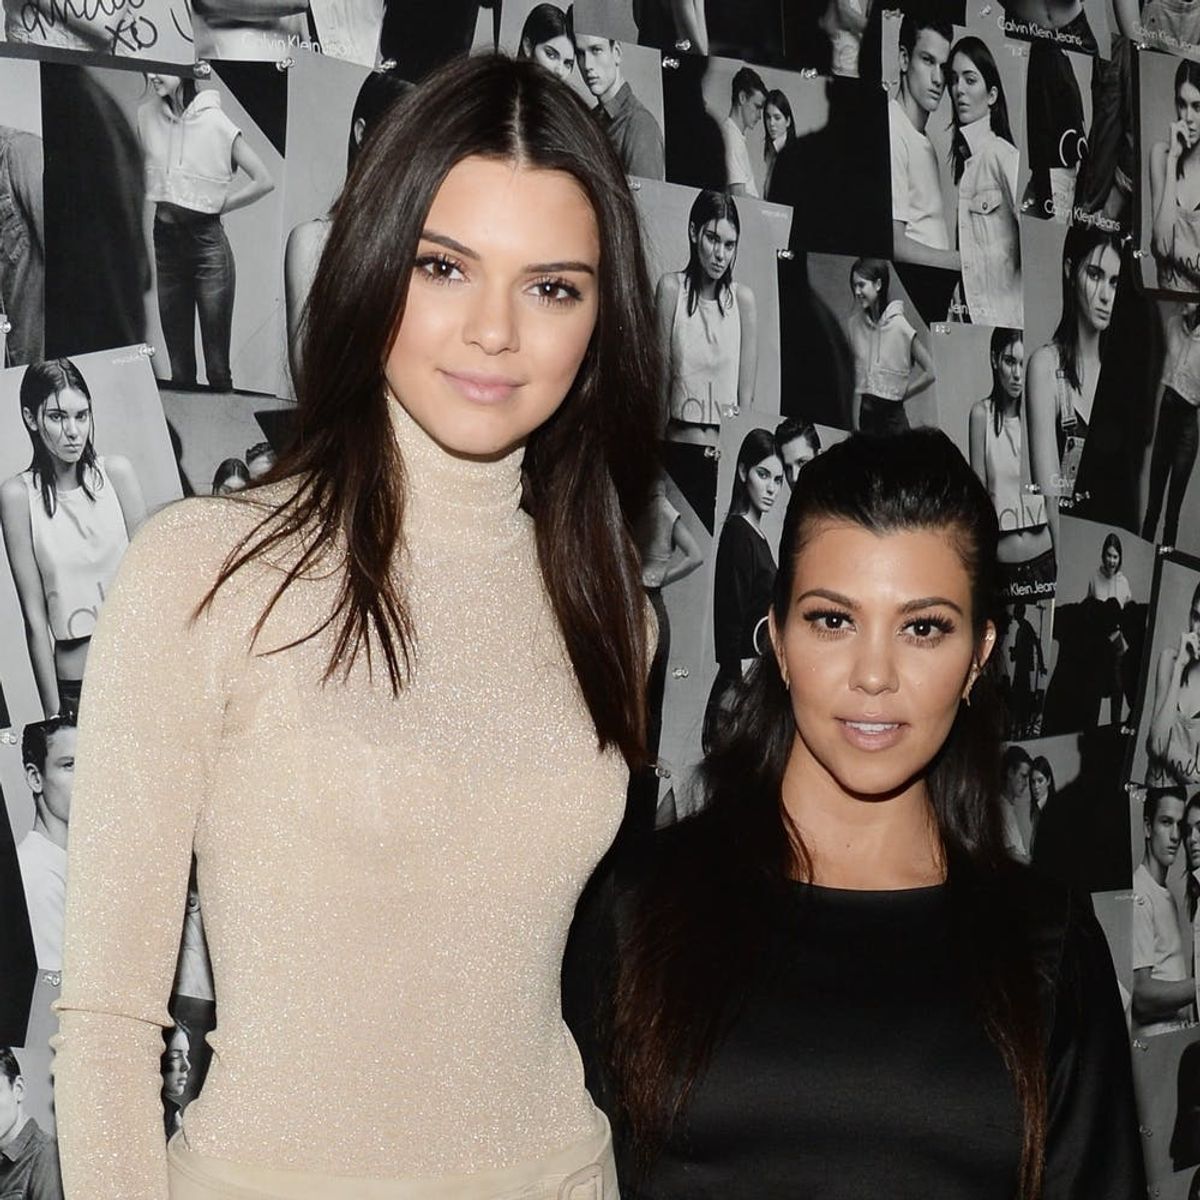 Kourtney Kardashian and Kendall Jenner Partied on a Yacht in Matching PJs